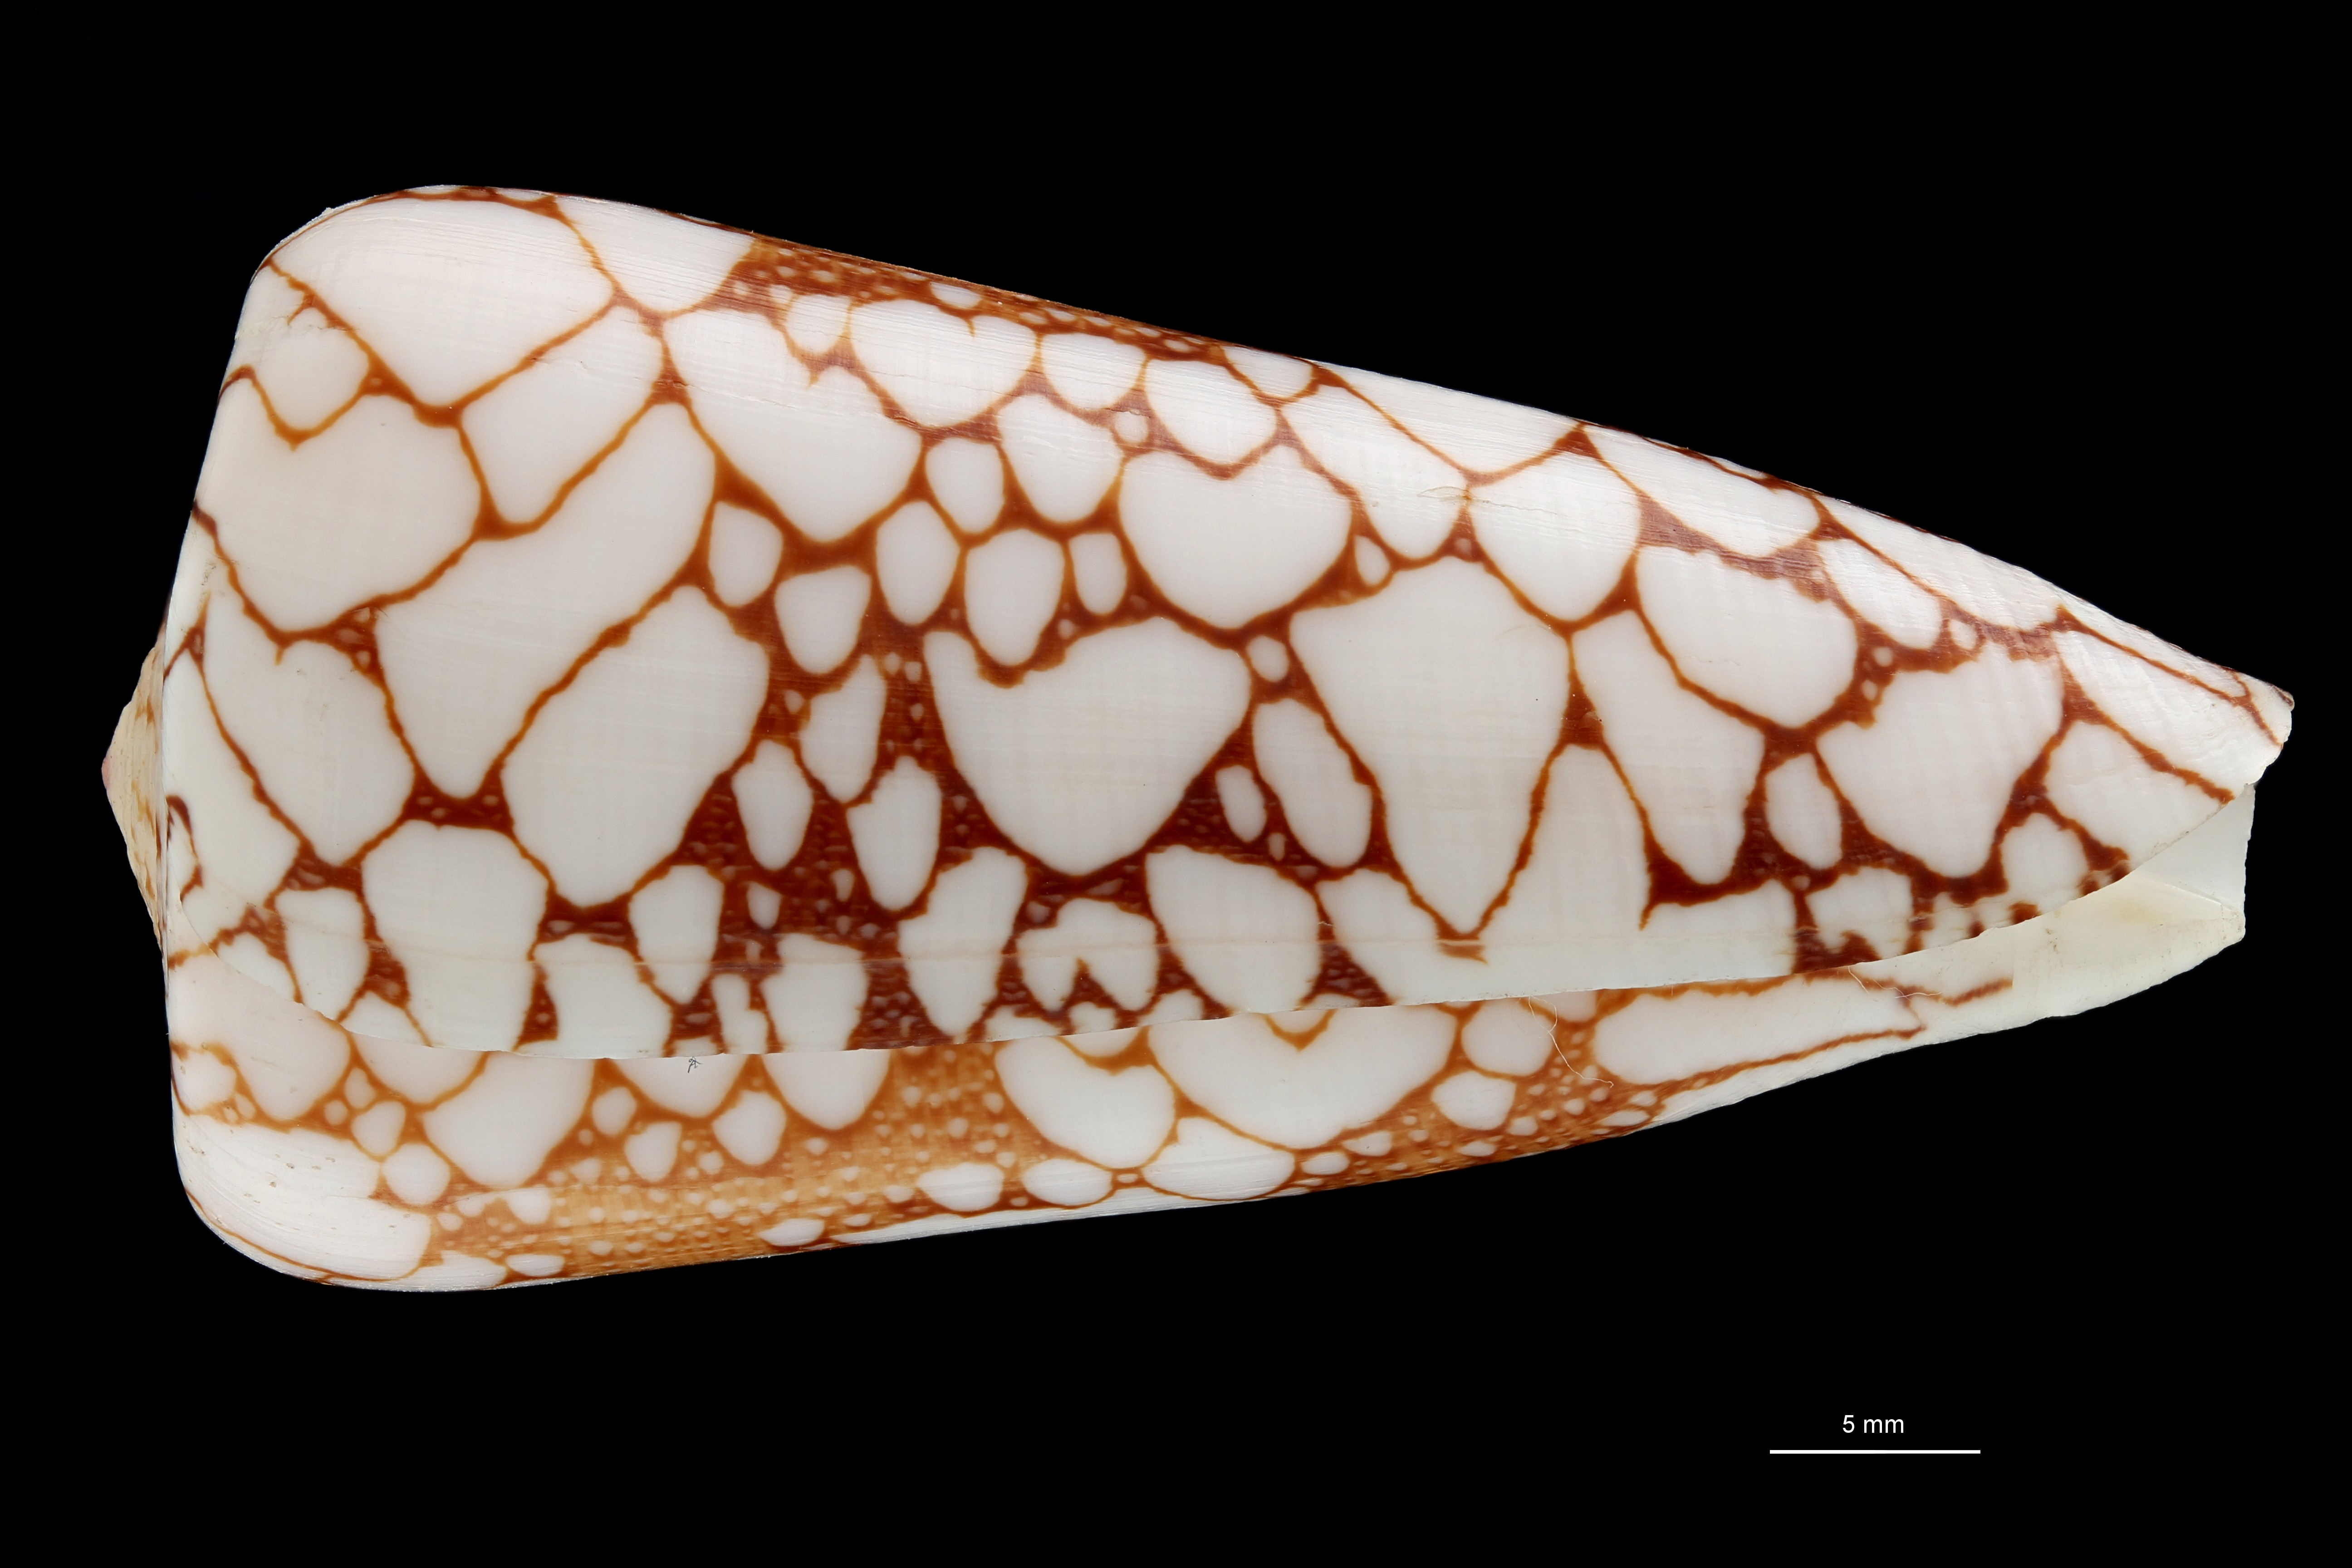 BE-RBINS-INV HOLOTYPE MT435 Conus pennaceus ganensis LATERAL ZS PMax Scaled.jpg